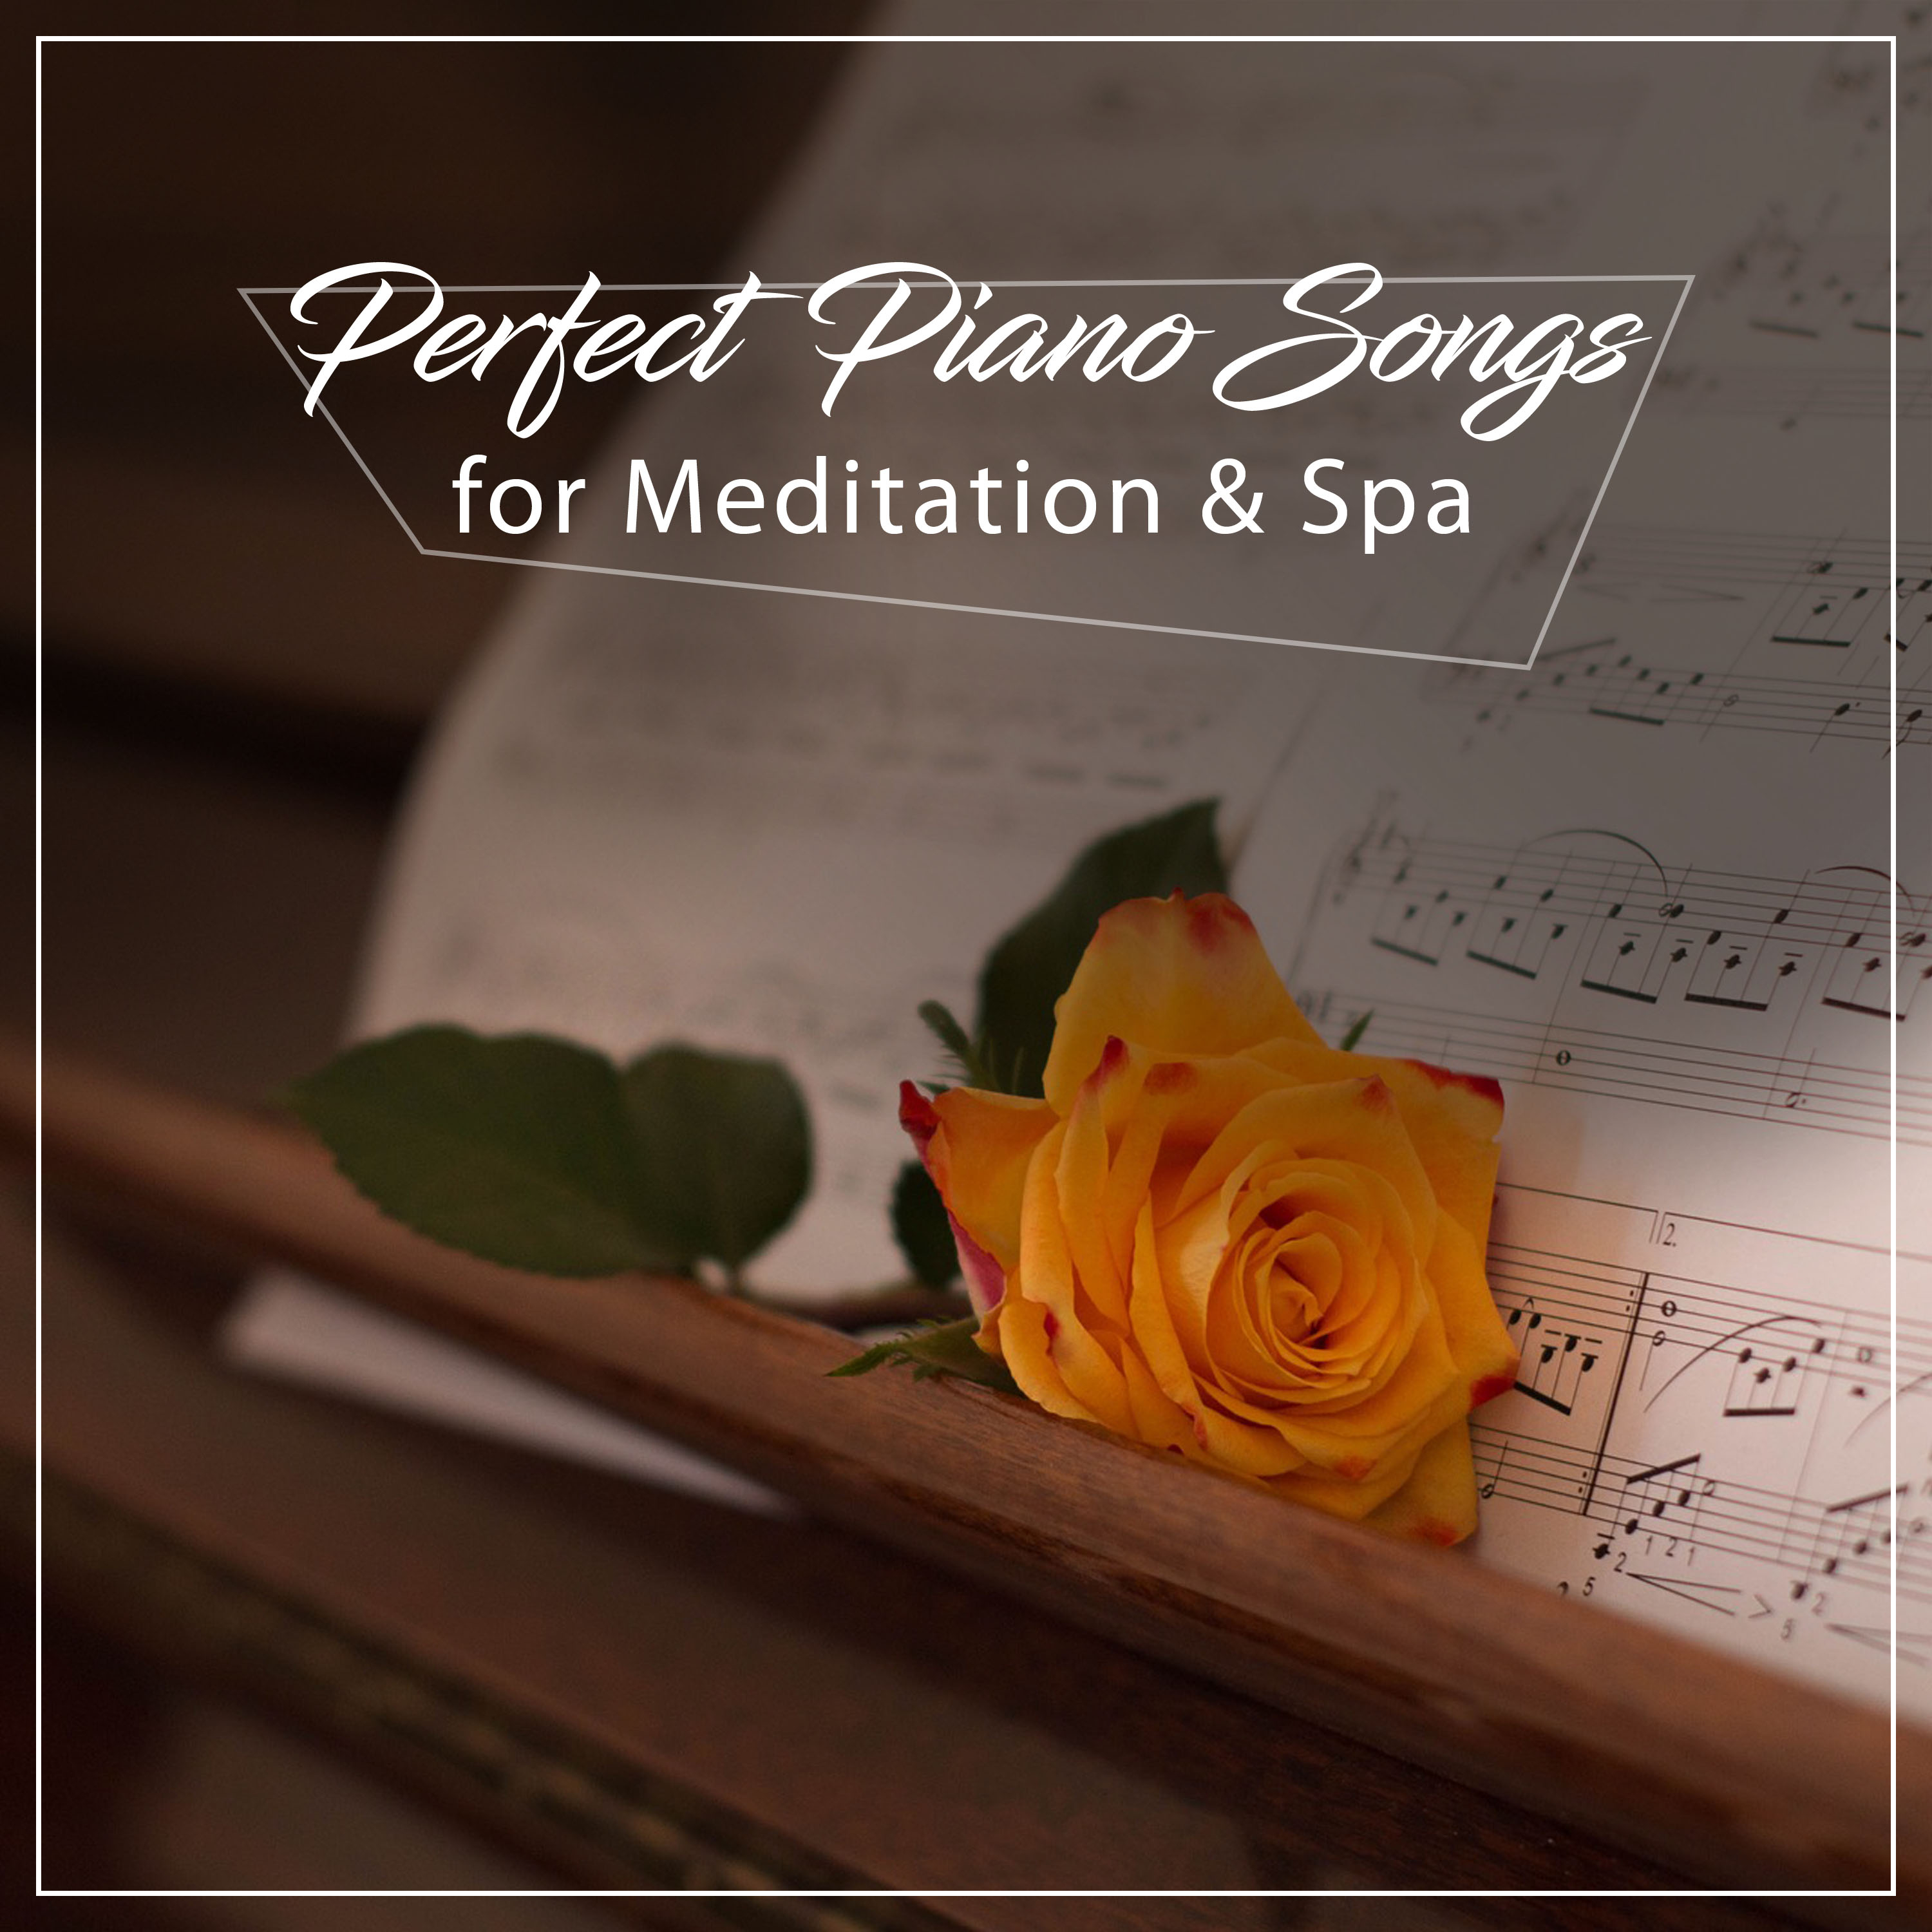 15 Perfect Piano Songs for Meditation and Spa